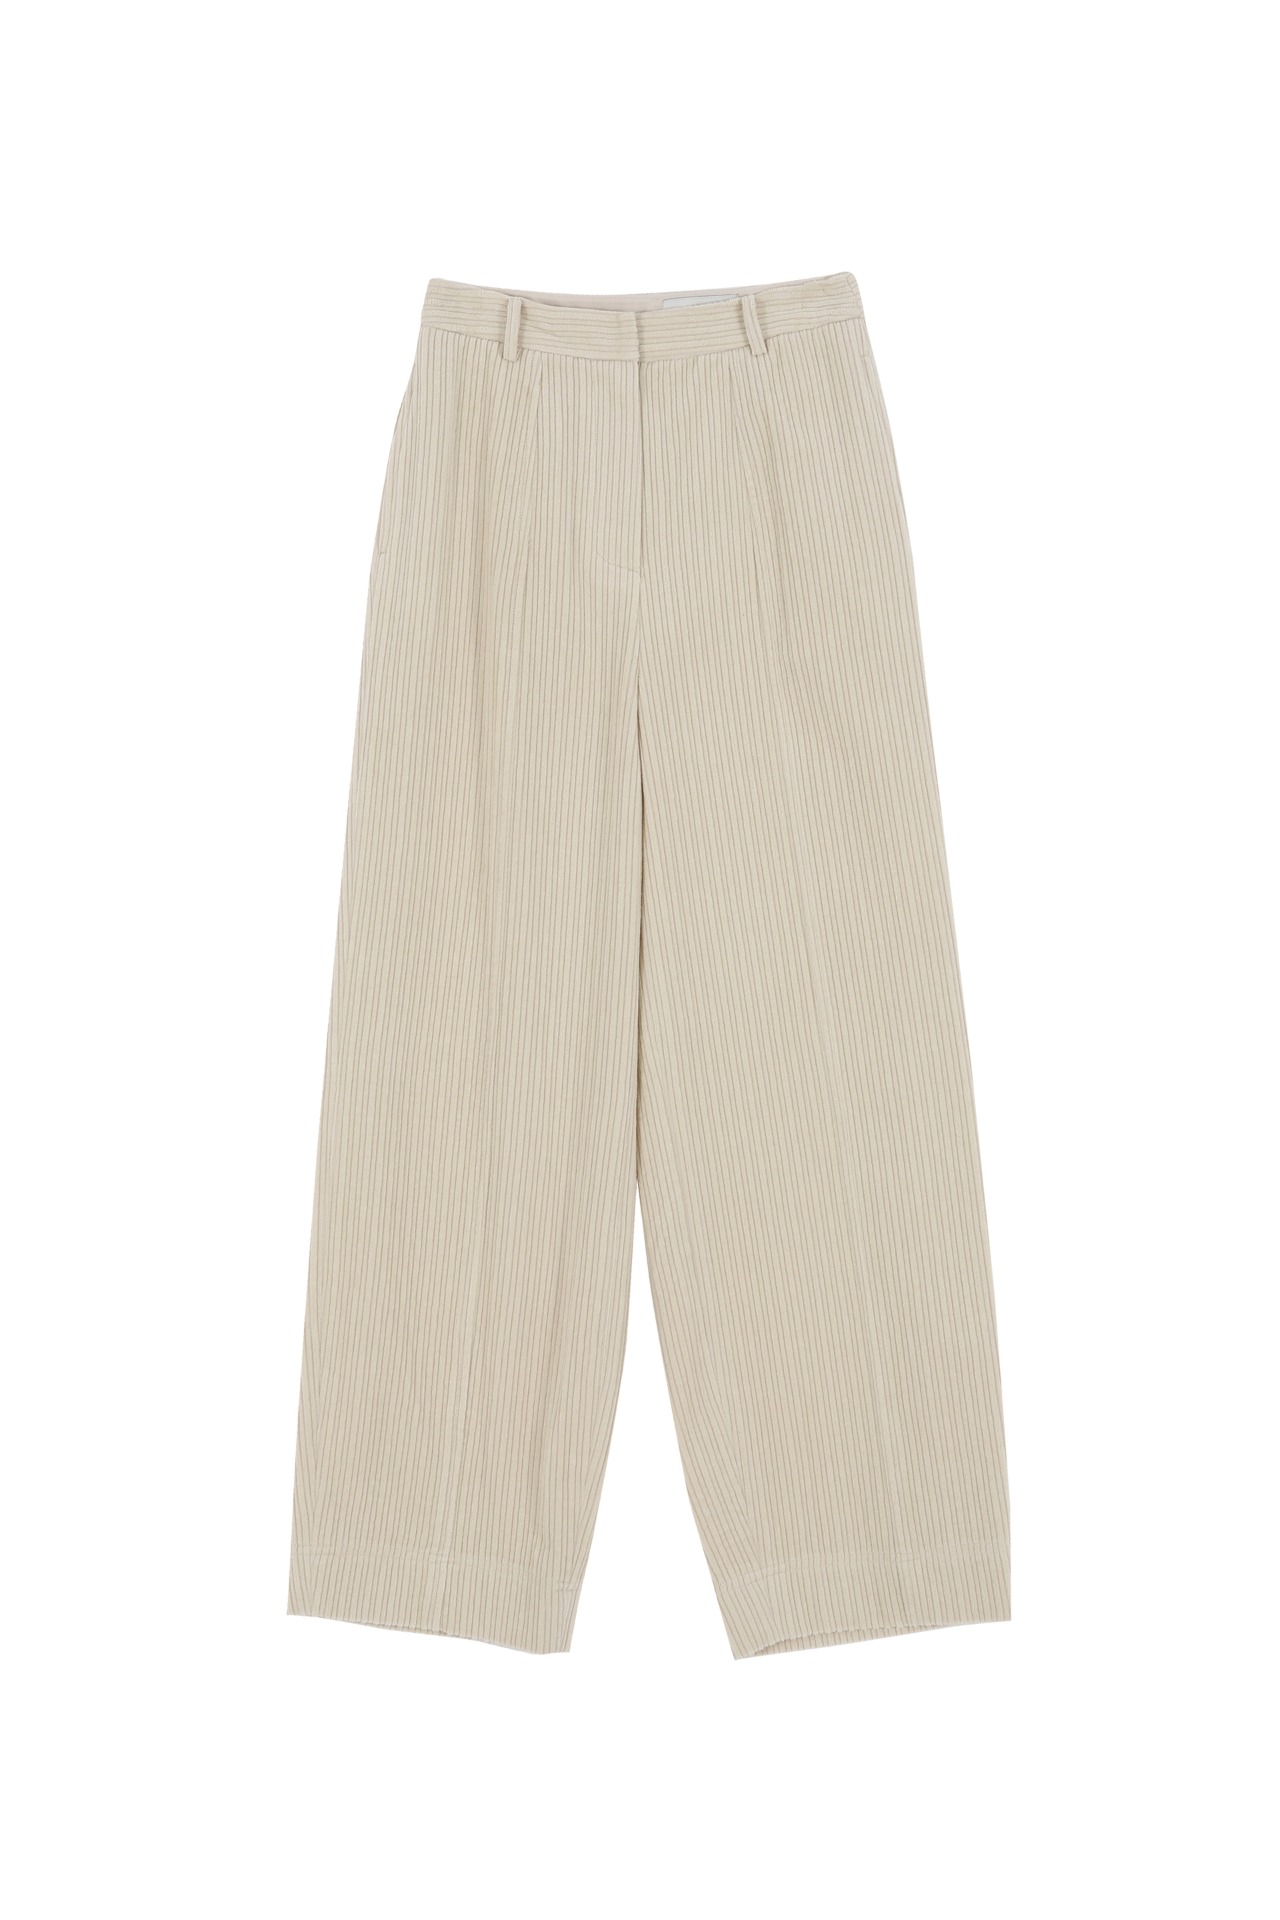 CORDUROY CURVED PANTS_IVORY